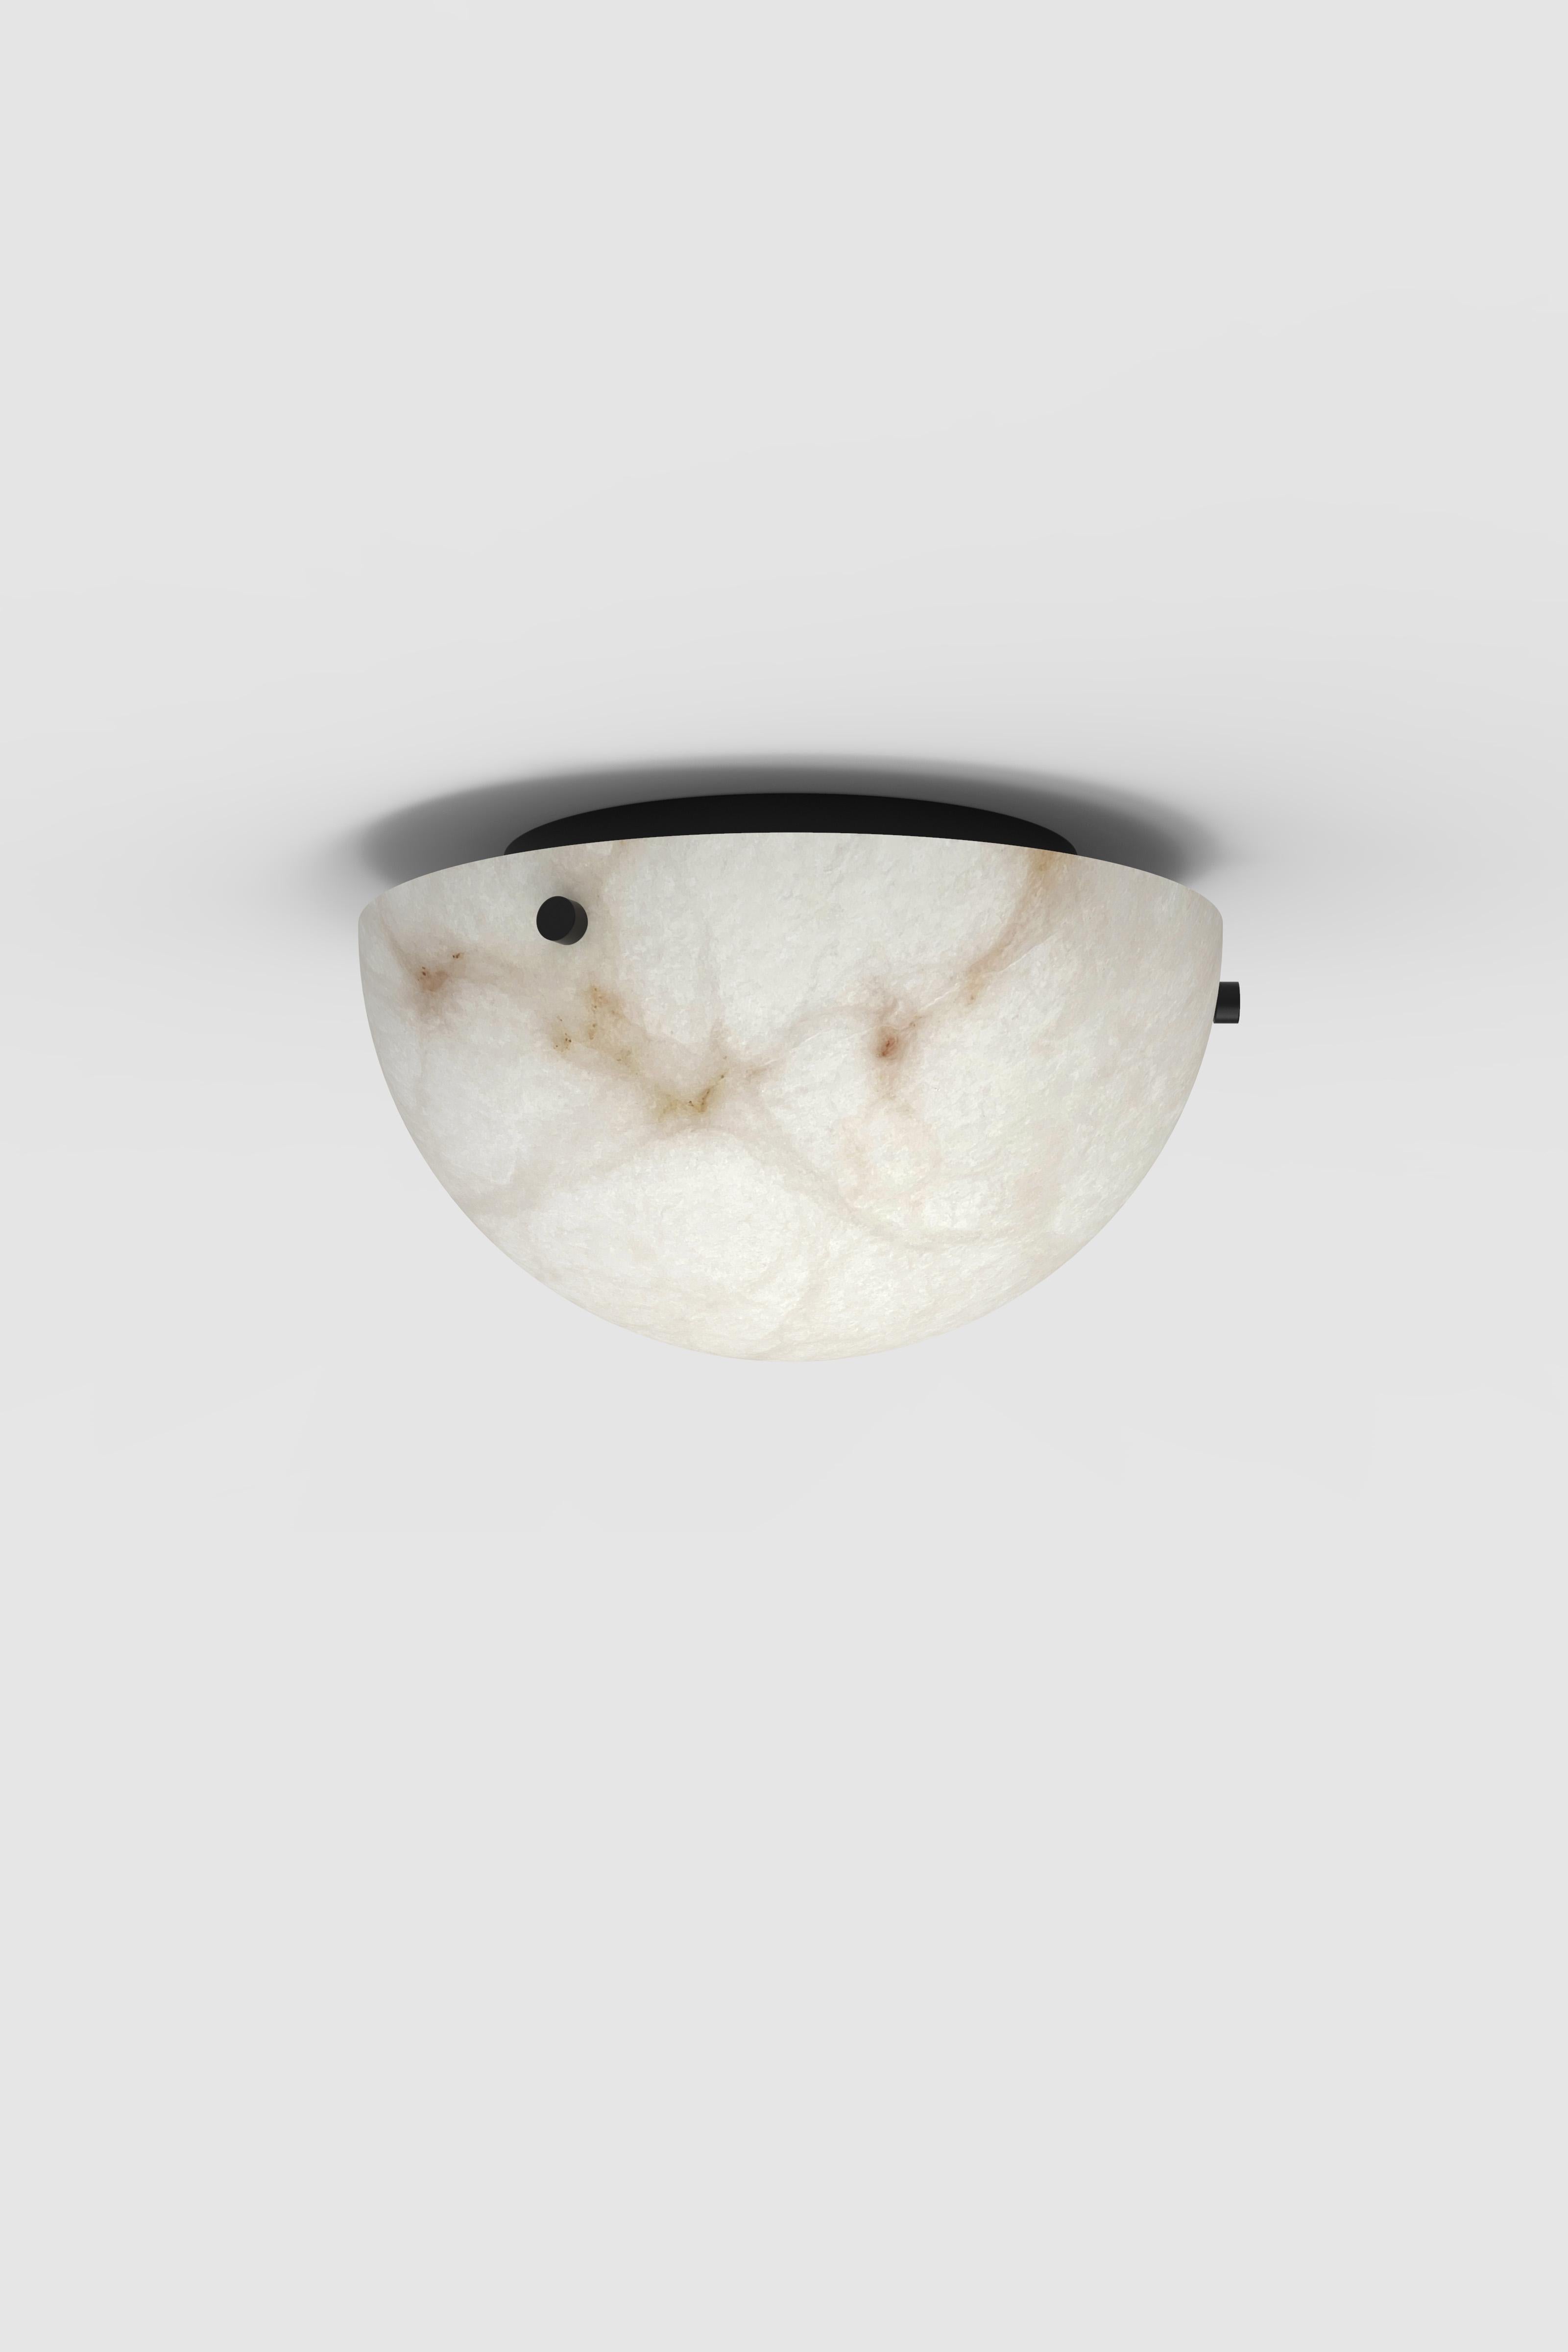 Blackened Contemporary Porta Sconce 301A in Alabaster by Orphan Work For Sale